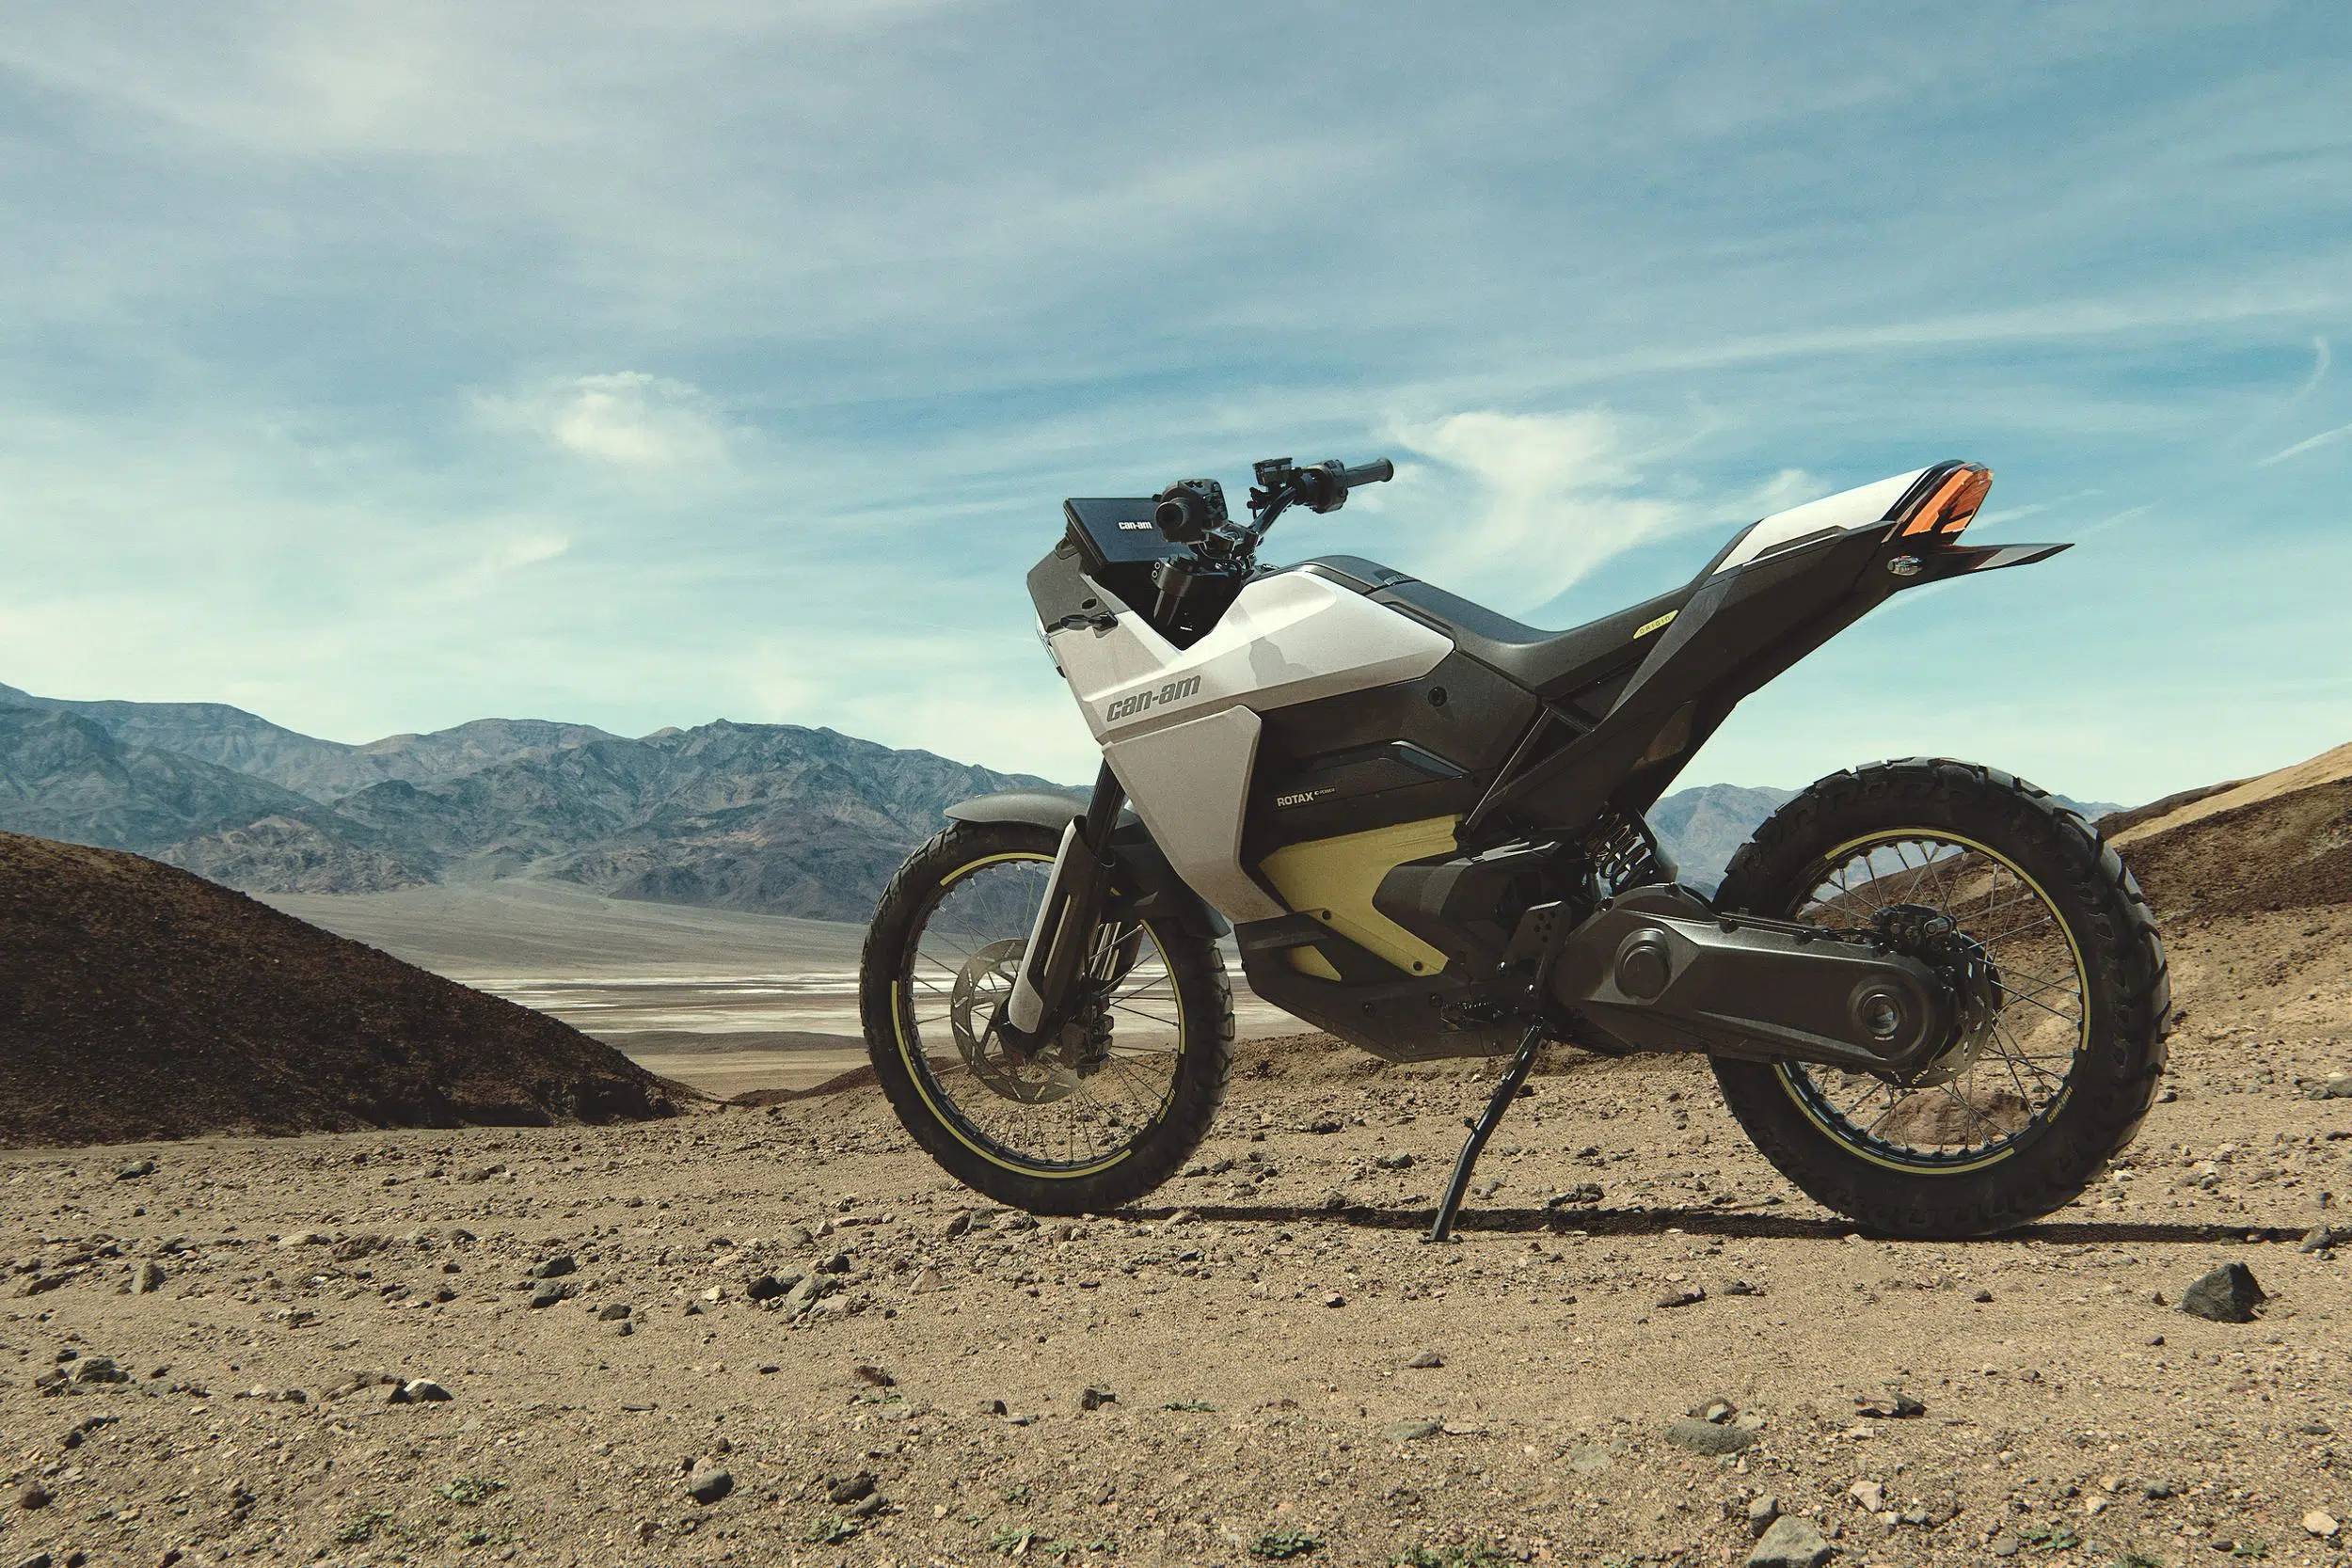 The Can-Am Origin electric motorcycle